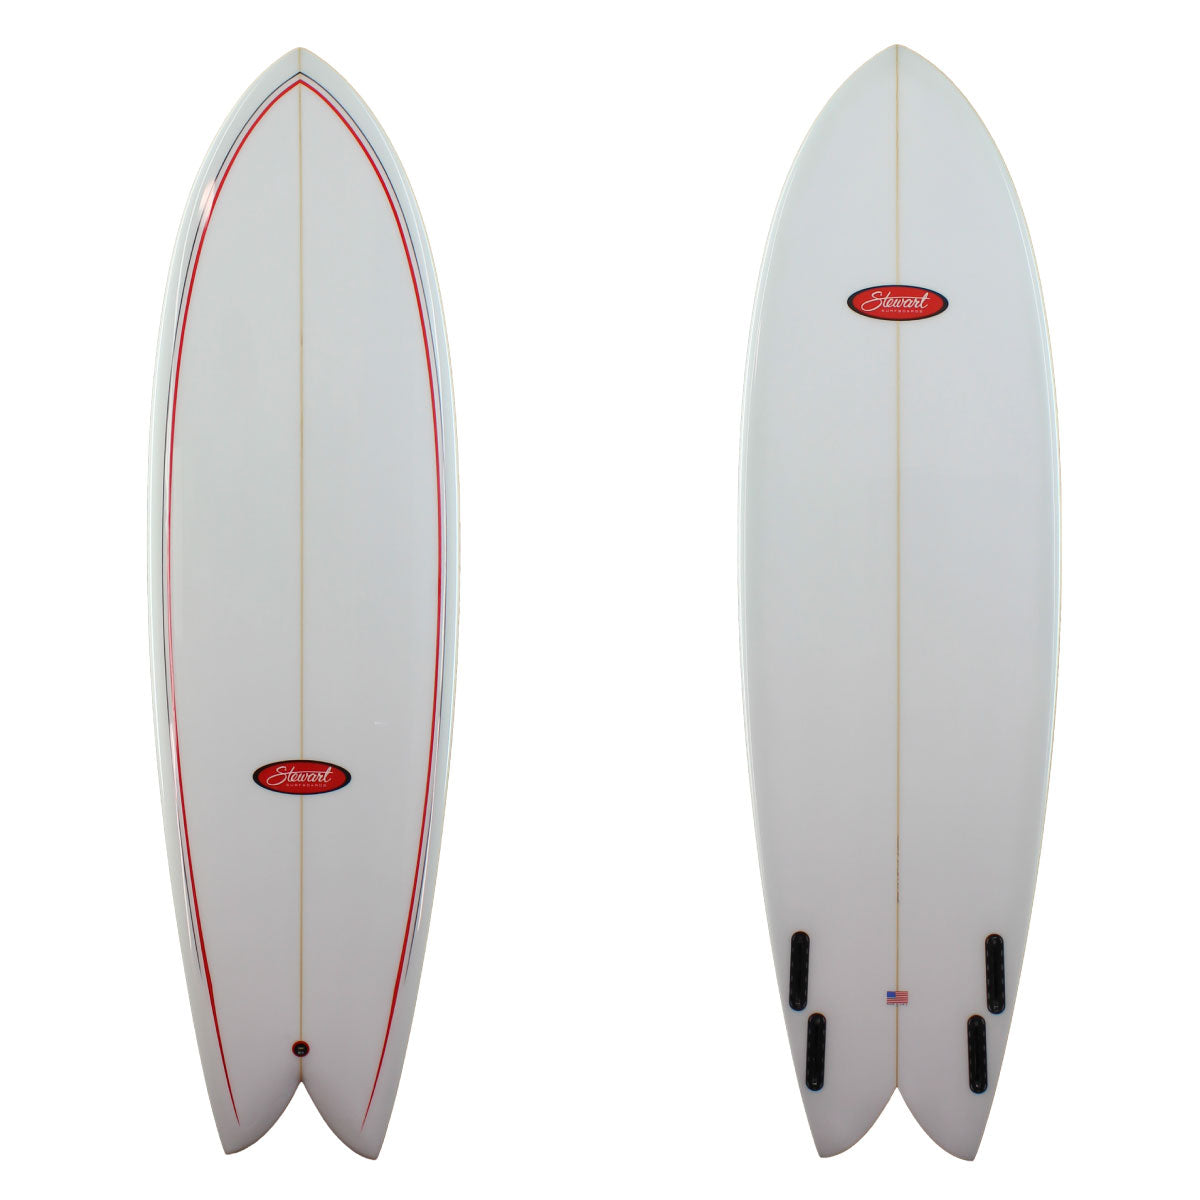 Stewart Surfboards 6'8" Retro Fish with red and black pinlines on deck, gloss and polish finish